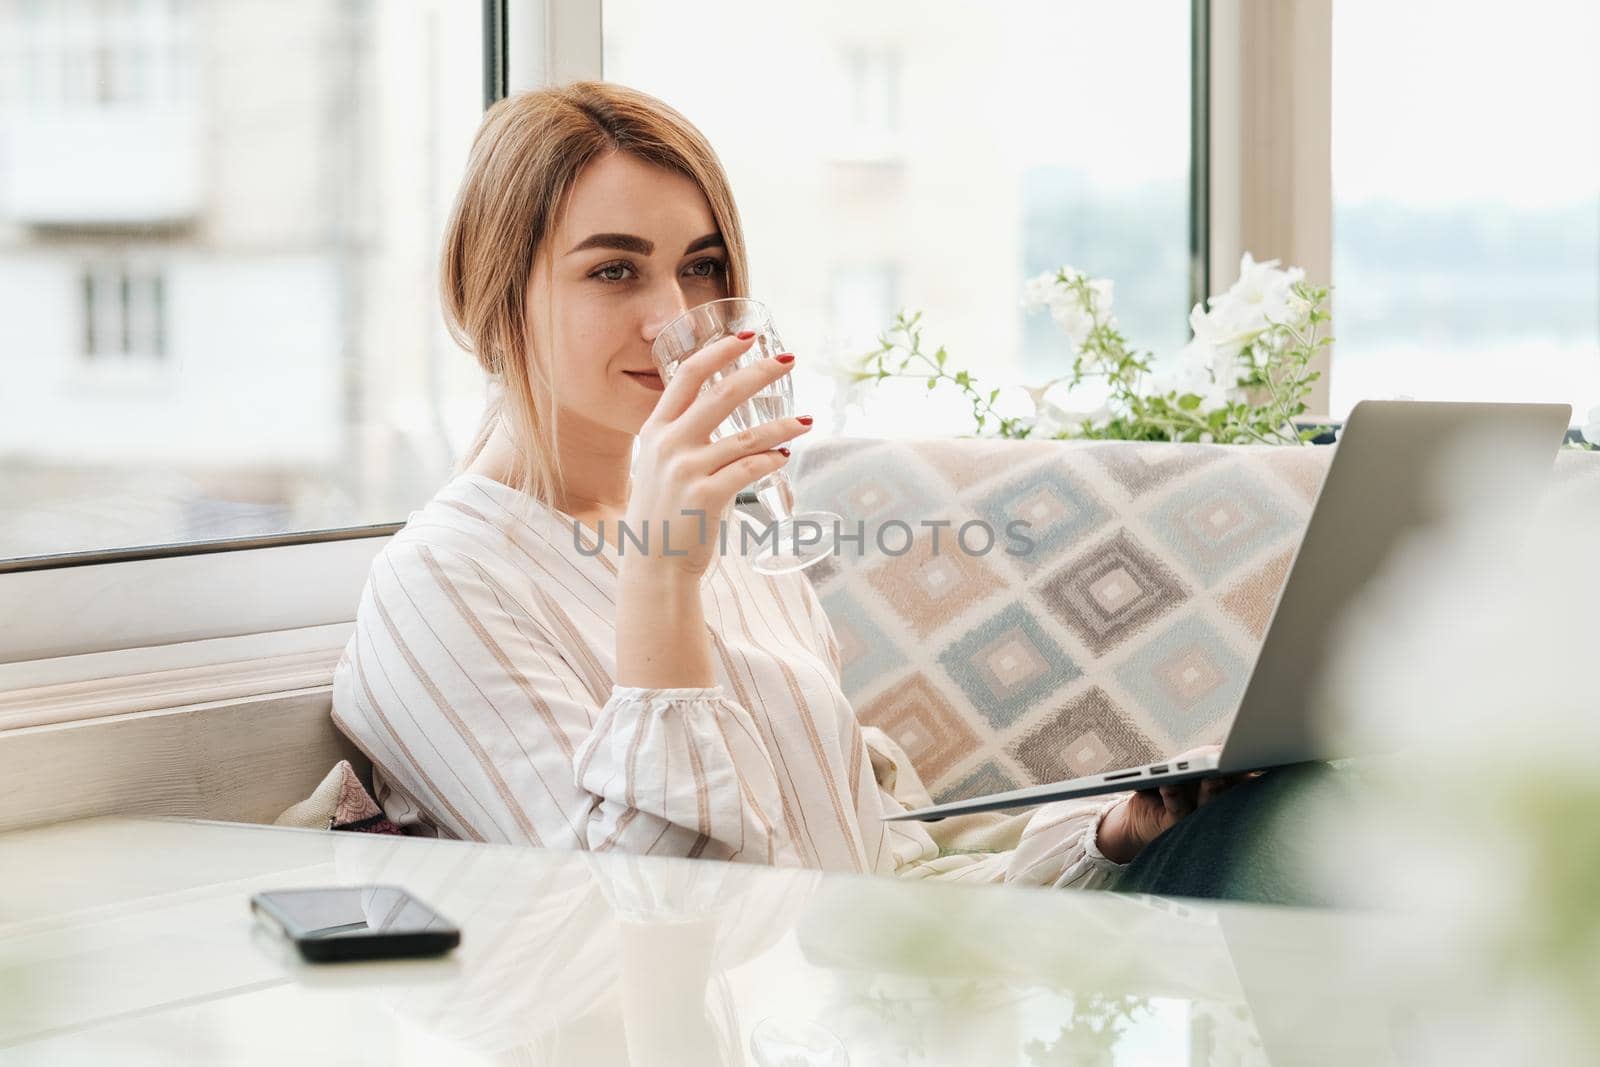 Young Woman Holding Laptop and Drinking Water While Sitting in Restaurant,Female Freelancer at Work